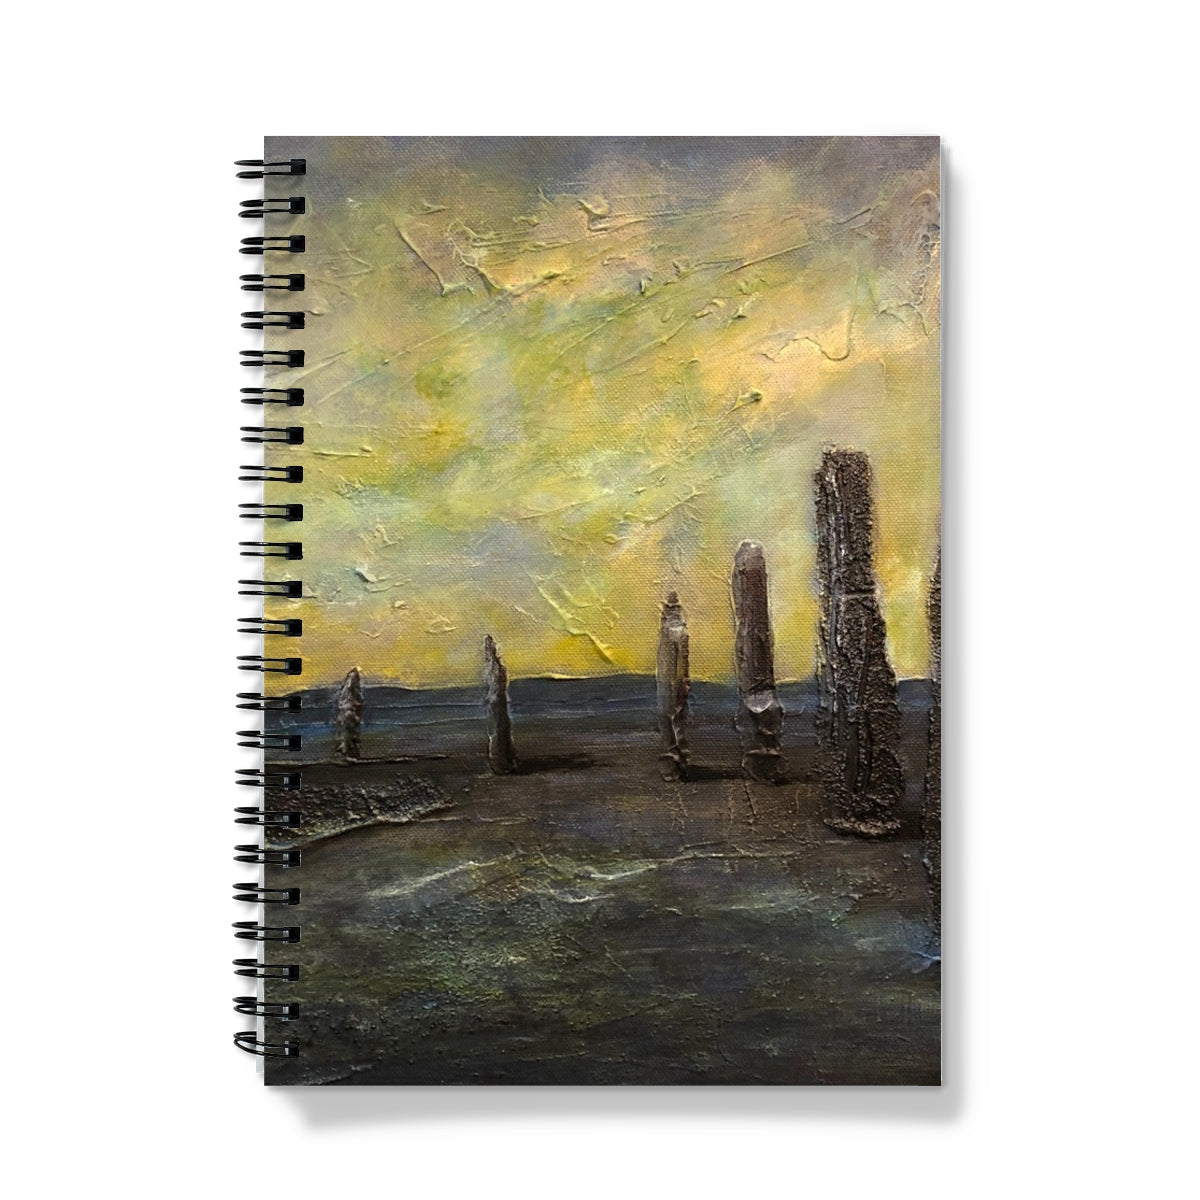 An Ethereal Ring Of Brodgar Art Gifts Notebook-Journals & Notebooks-Orkney Art Gallery-A4-Graph-Paintings, Prints, Homeware, Art Gifts From Scotland By Scottish Artist Kevin Hunter